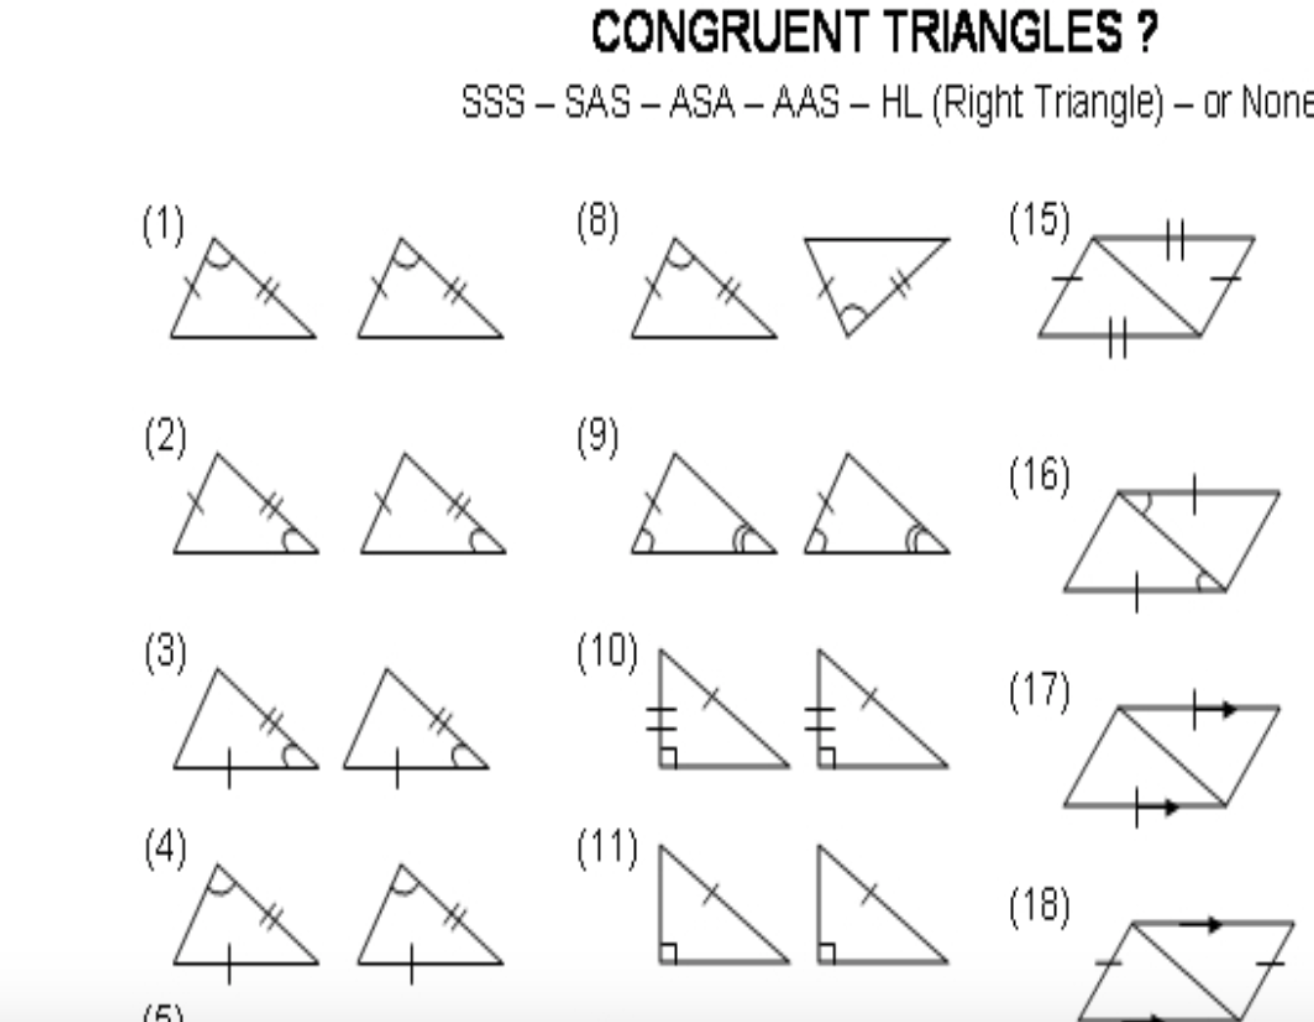 problem solving triangle congruence asa aas and hl